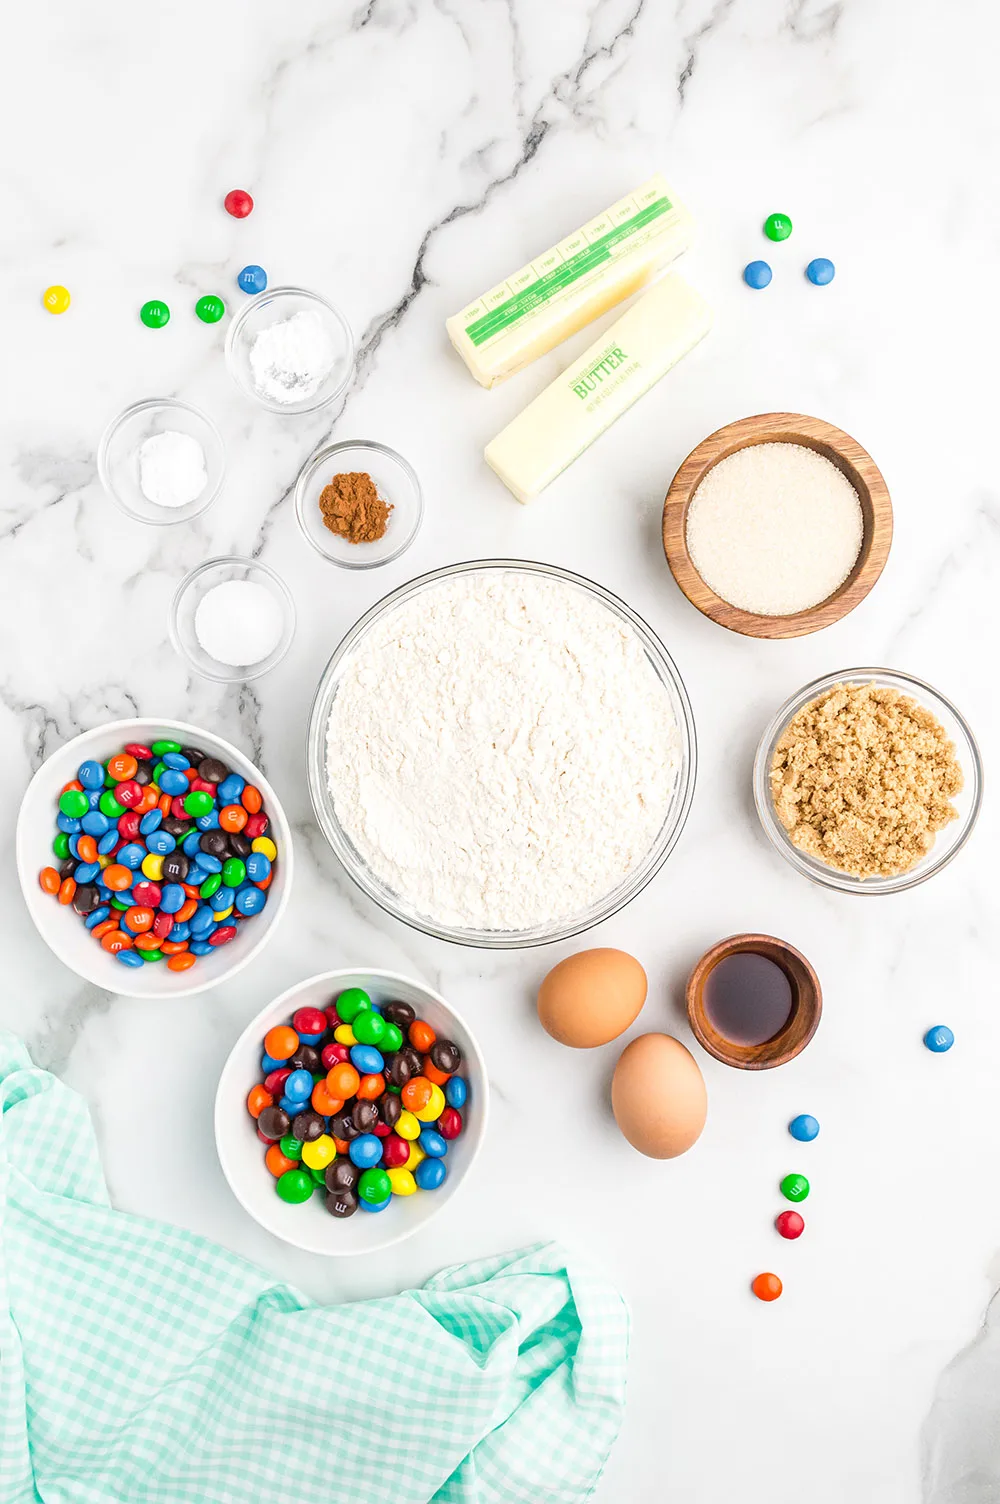 Butter, flour, M&M candies, eggs, and other ingredients to make cookies. 